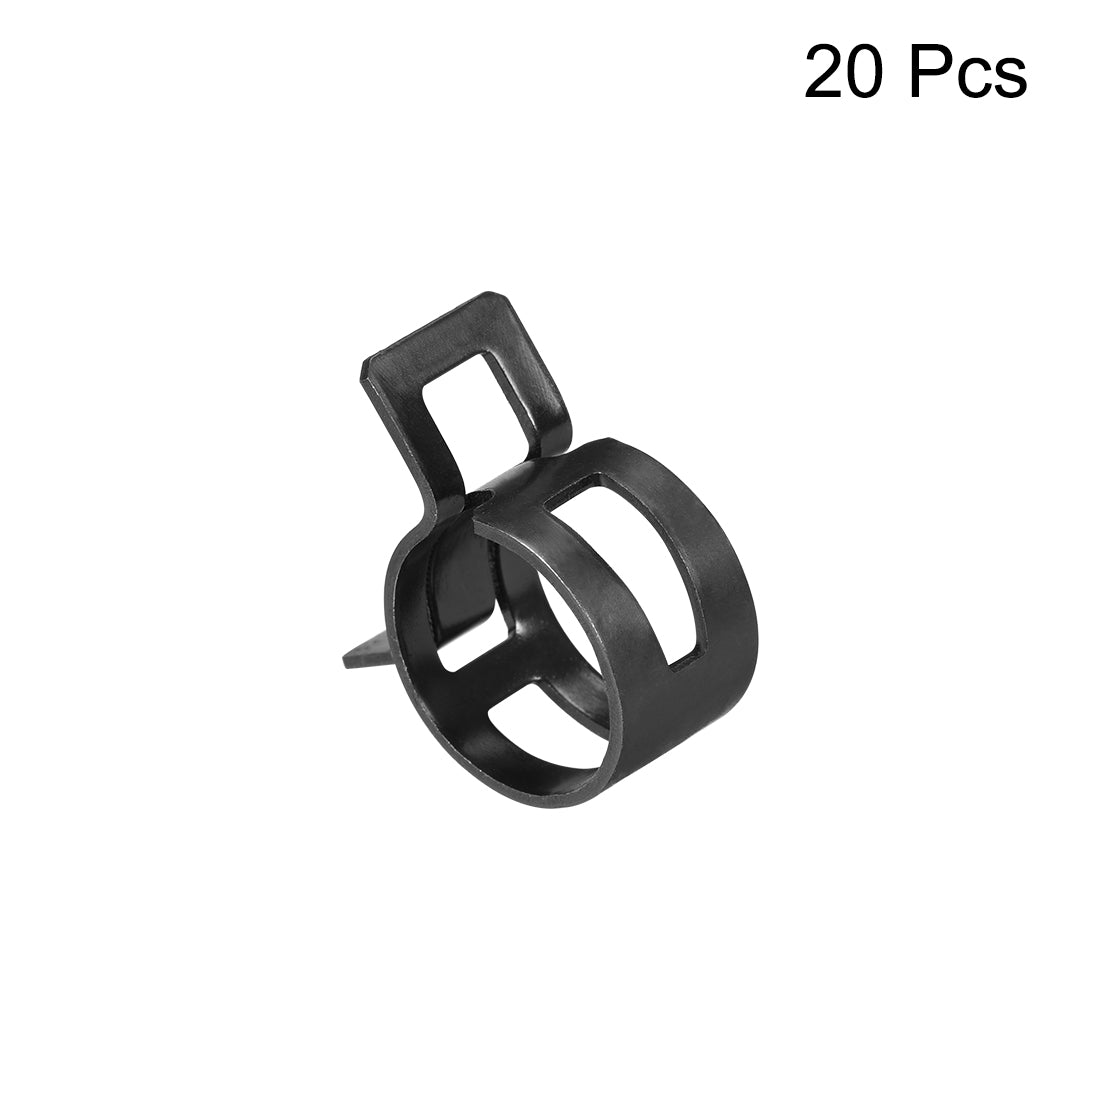 Uxcell Uxcell Steel Band Clamp 18mm for Fuel Line Silicone Hose Tube Spring Clips Clamp Black Manganese Steel 20Pcs